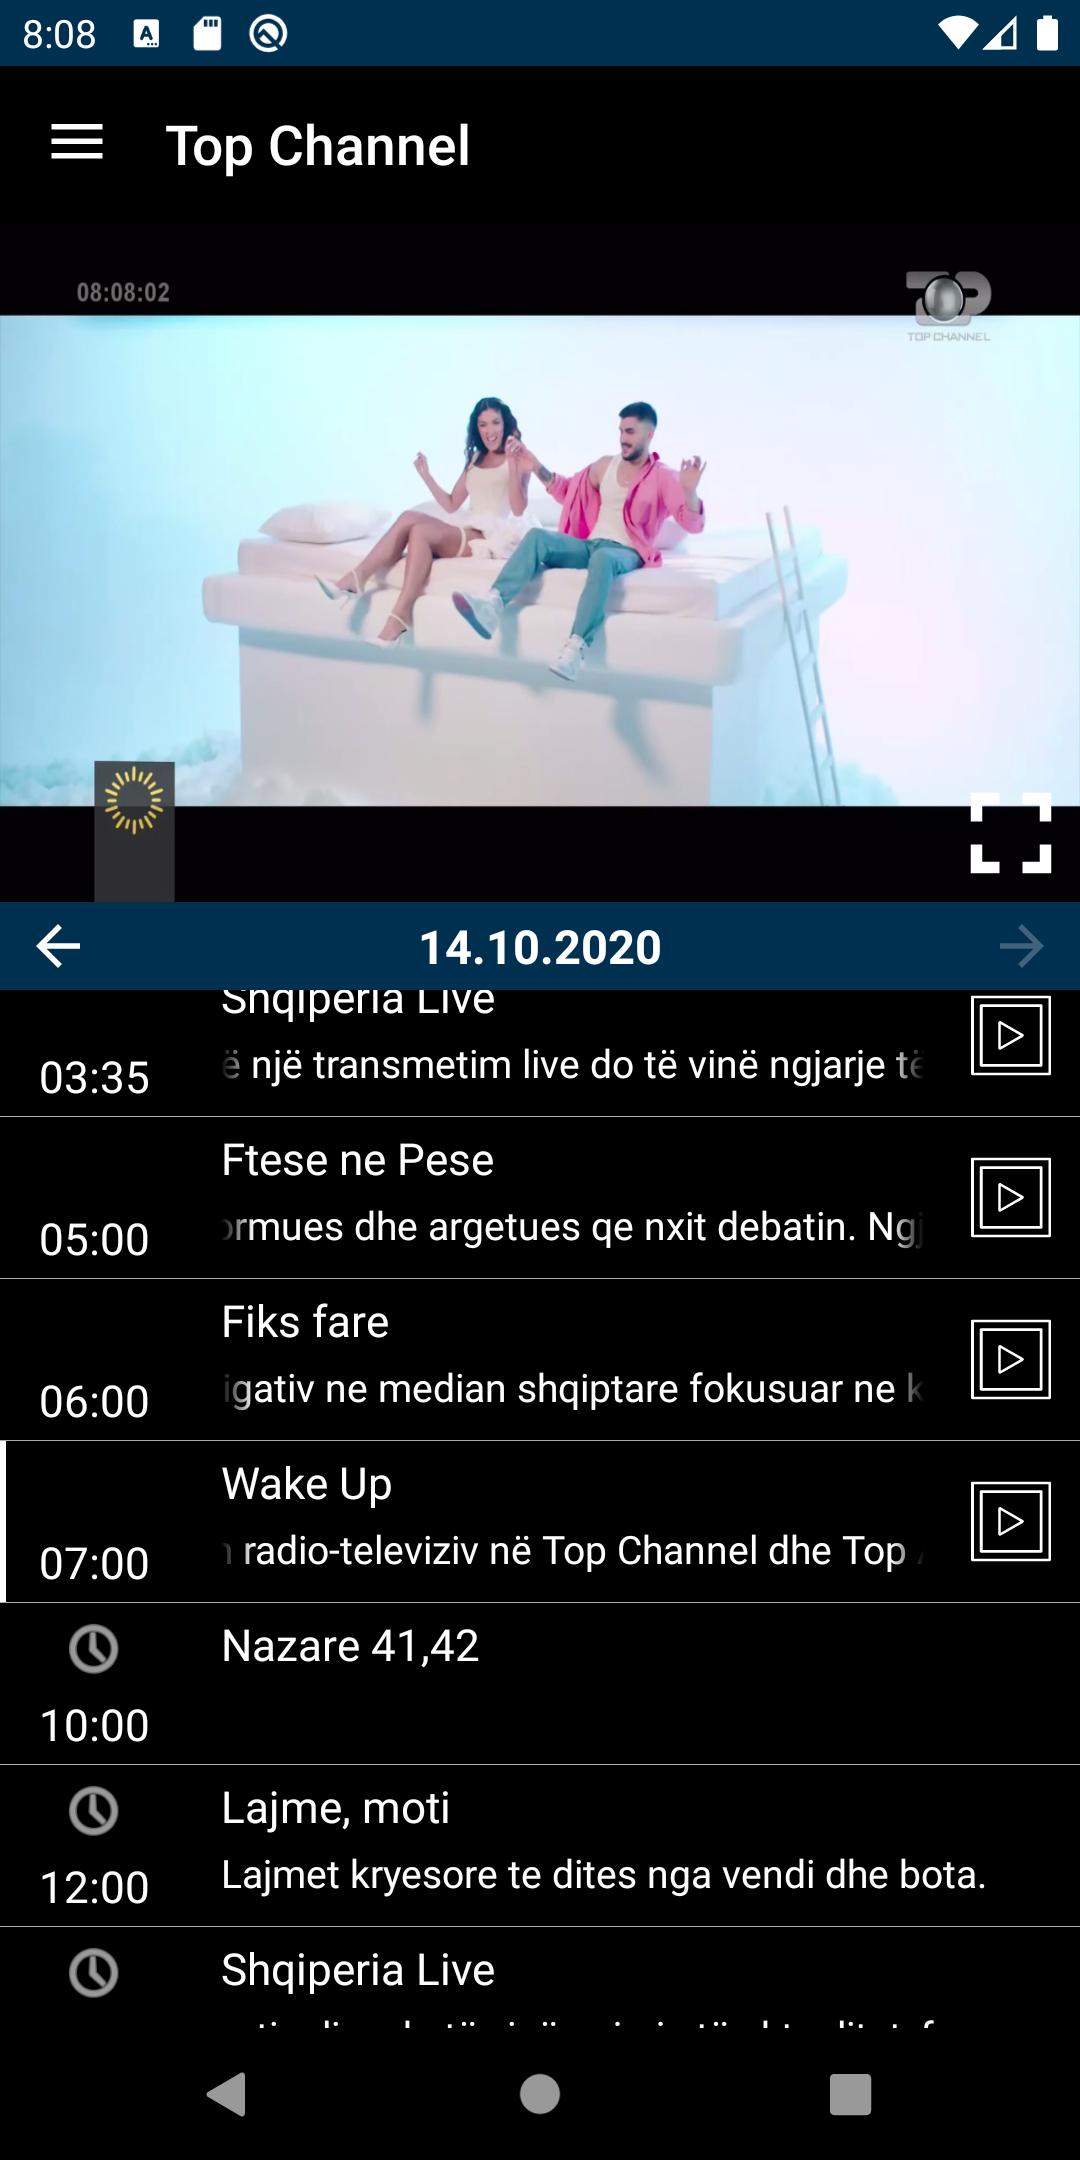 Top Channel TV for Android - APK Download